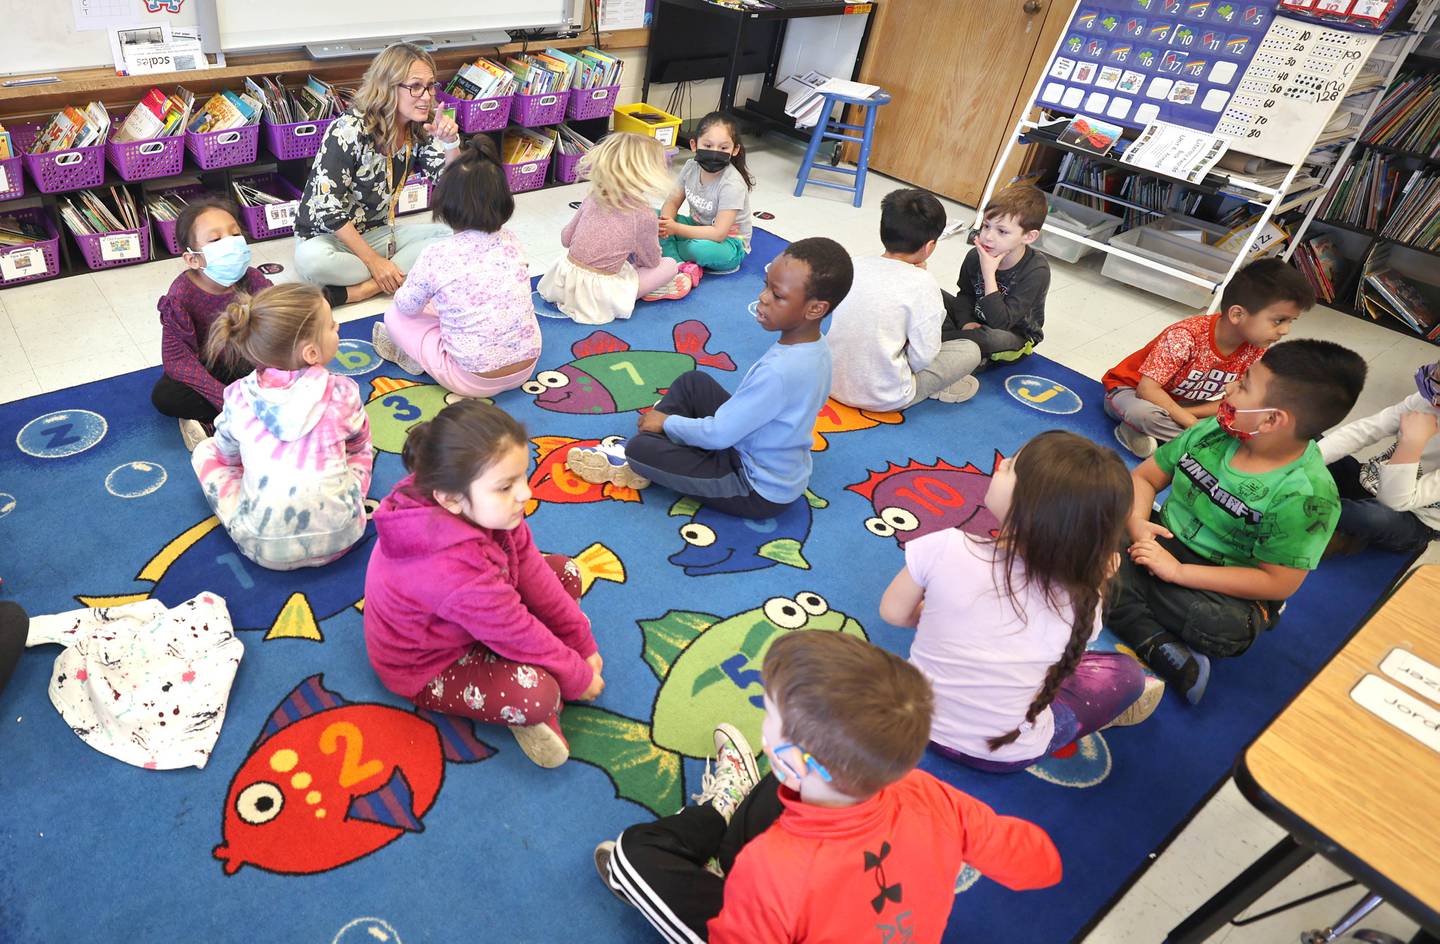 Tracy Paszotta, a kindergarten teacher at Littlejohn Elementary School, greets her students the morning of Monday, March 28, 2022, at the school in DeKalb.